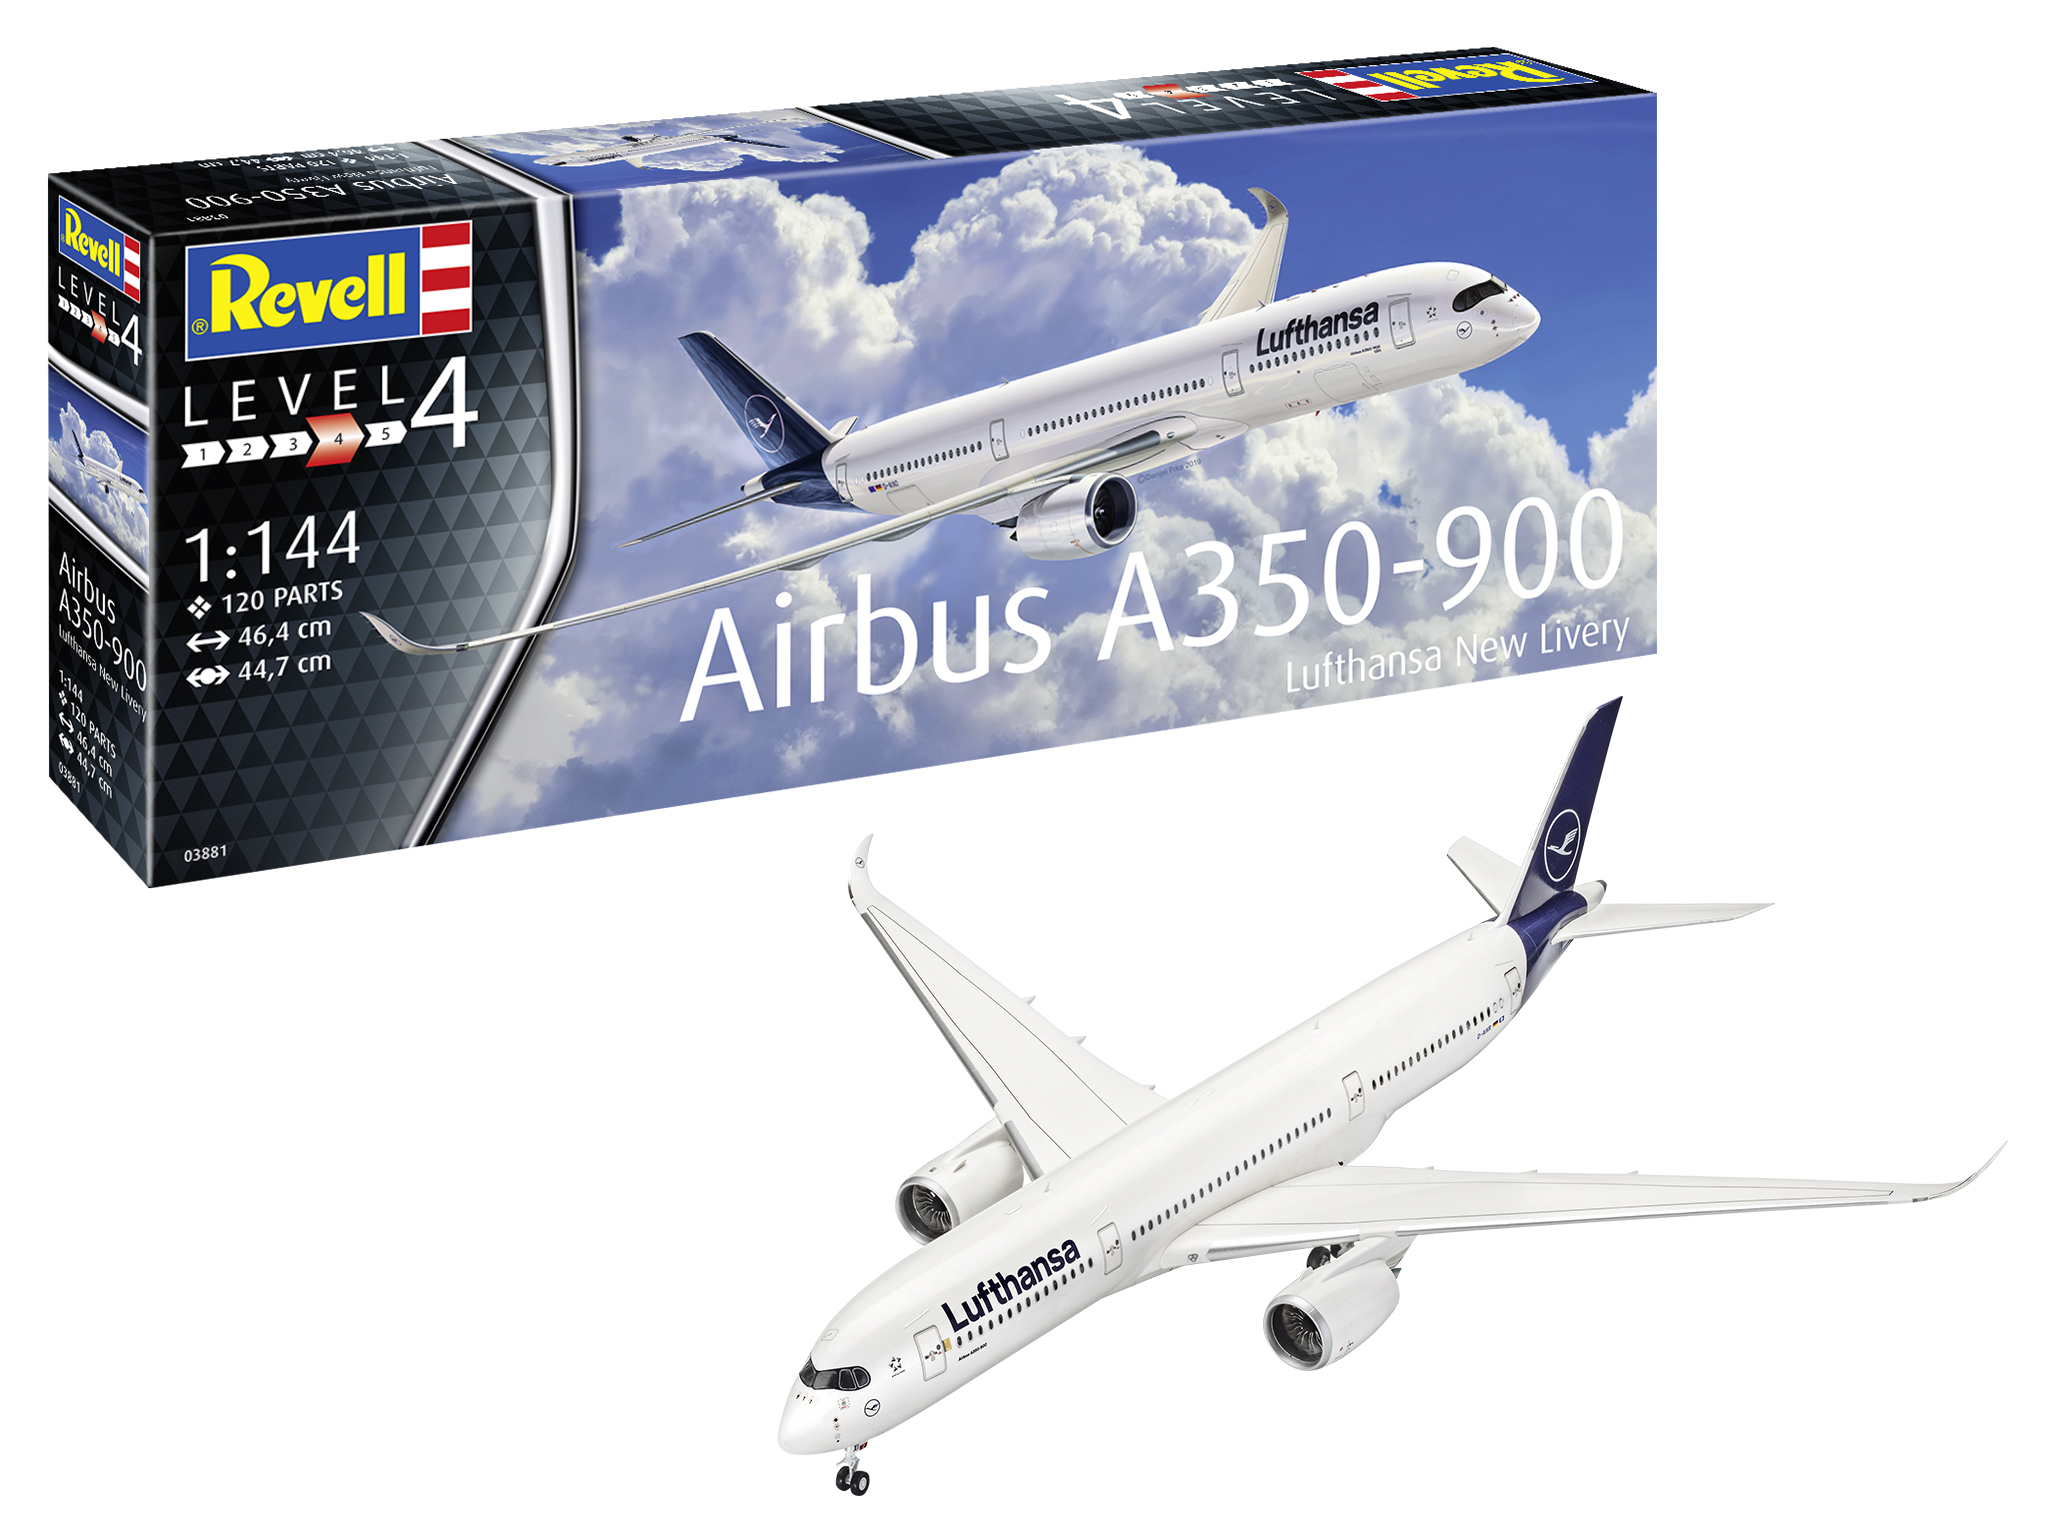 revell-03881-Airbus-A350-900-Lufthansa-New-Livery